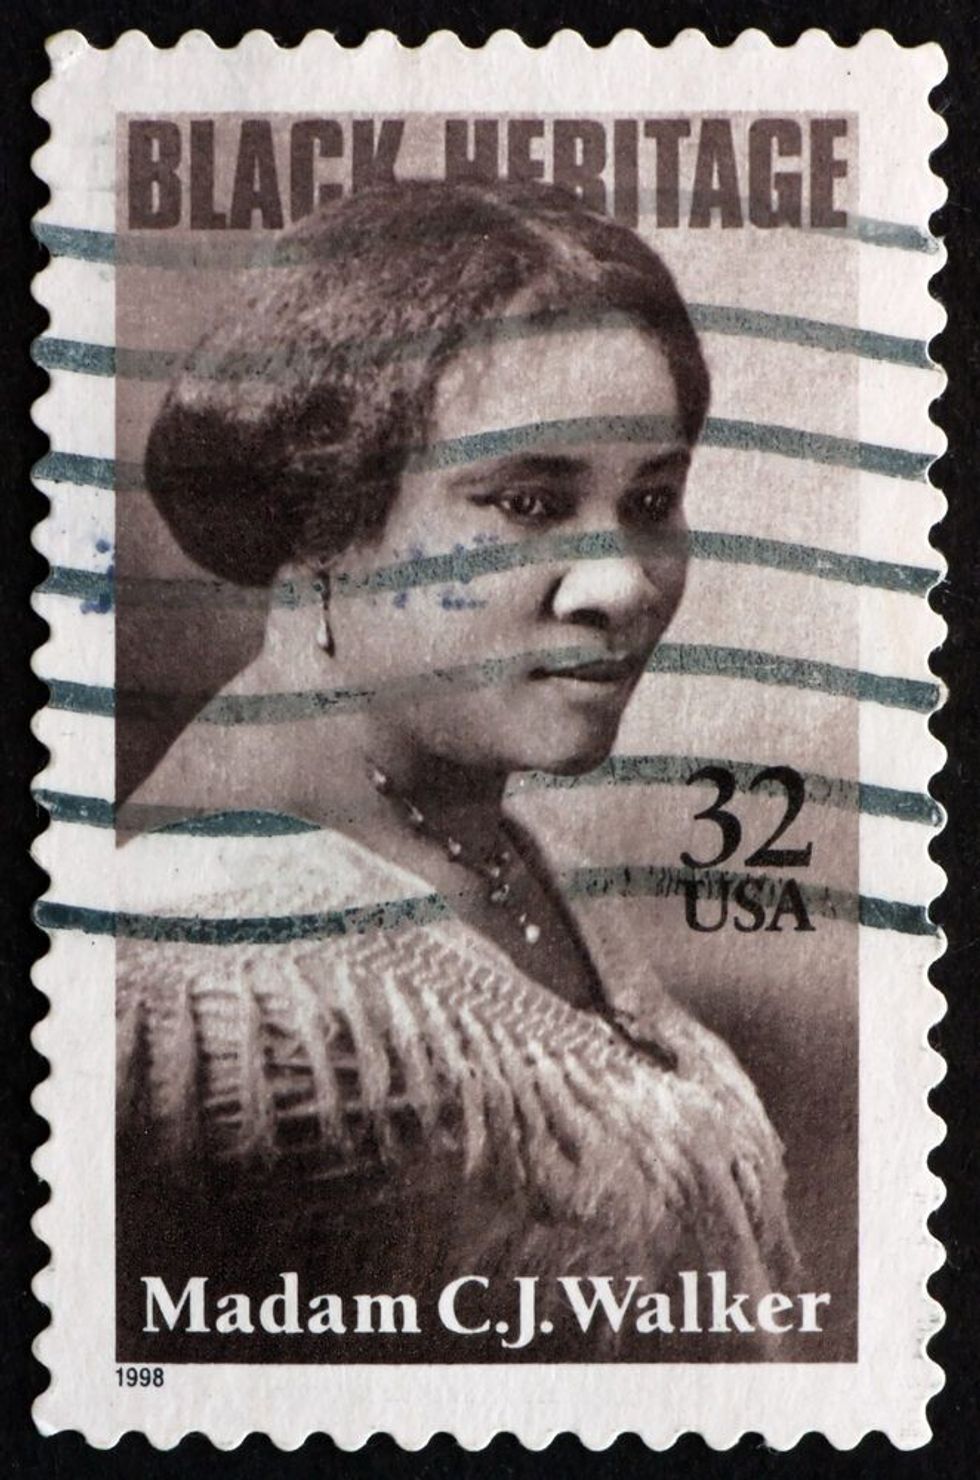 a stamp printed in the USA shows Madam C. J. Walker, Entrepreneur, Philanthropist, and the First Female, self-made Millionaire in America, Black Heritage, circa 1998